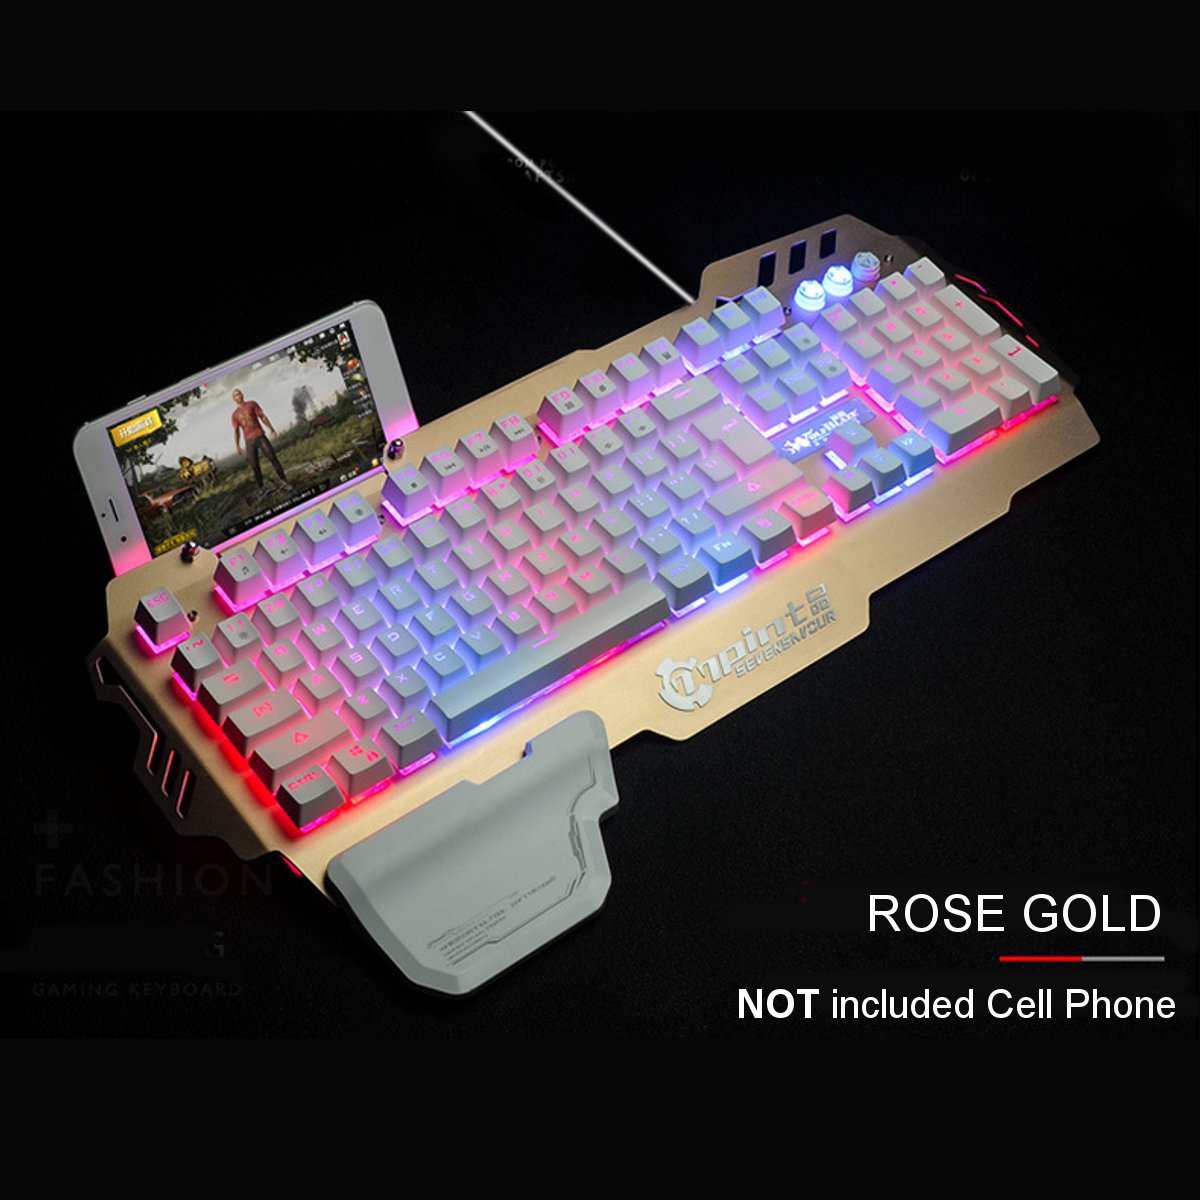 PK-900-104-Keys-Wired-Colorful-Backlight-Competitive-Games-Gaming-Keyboard-Home-Multimedia-Laptop-Co-1677603-12